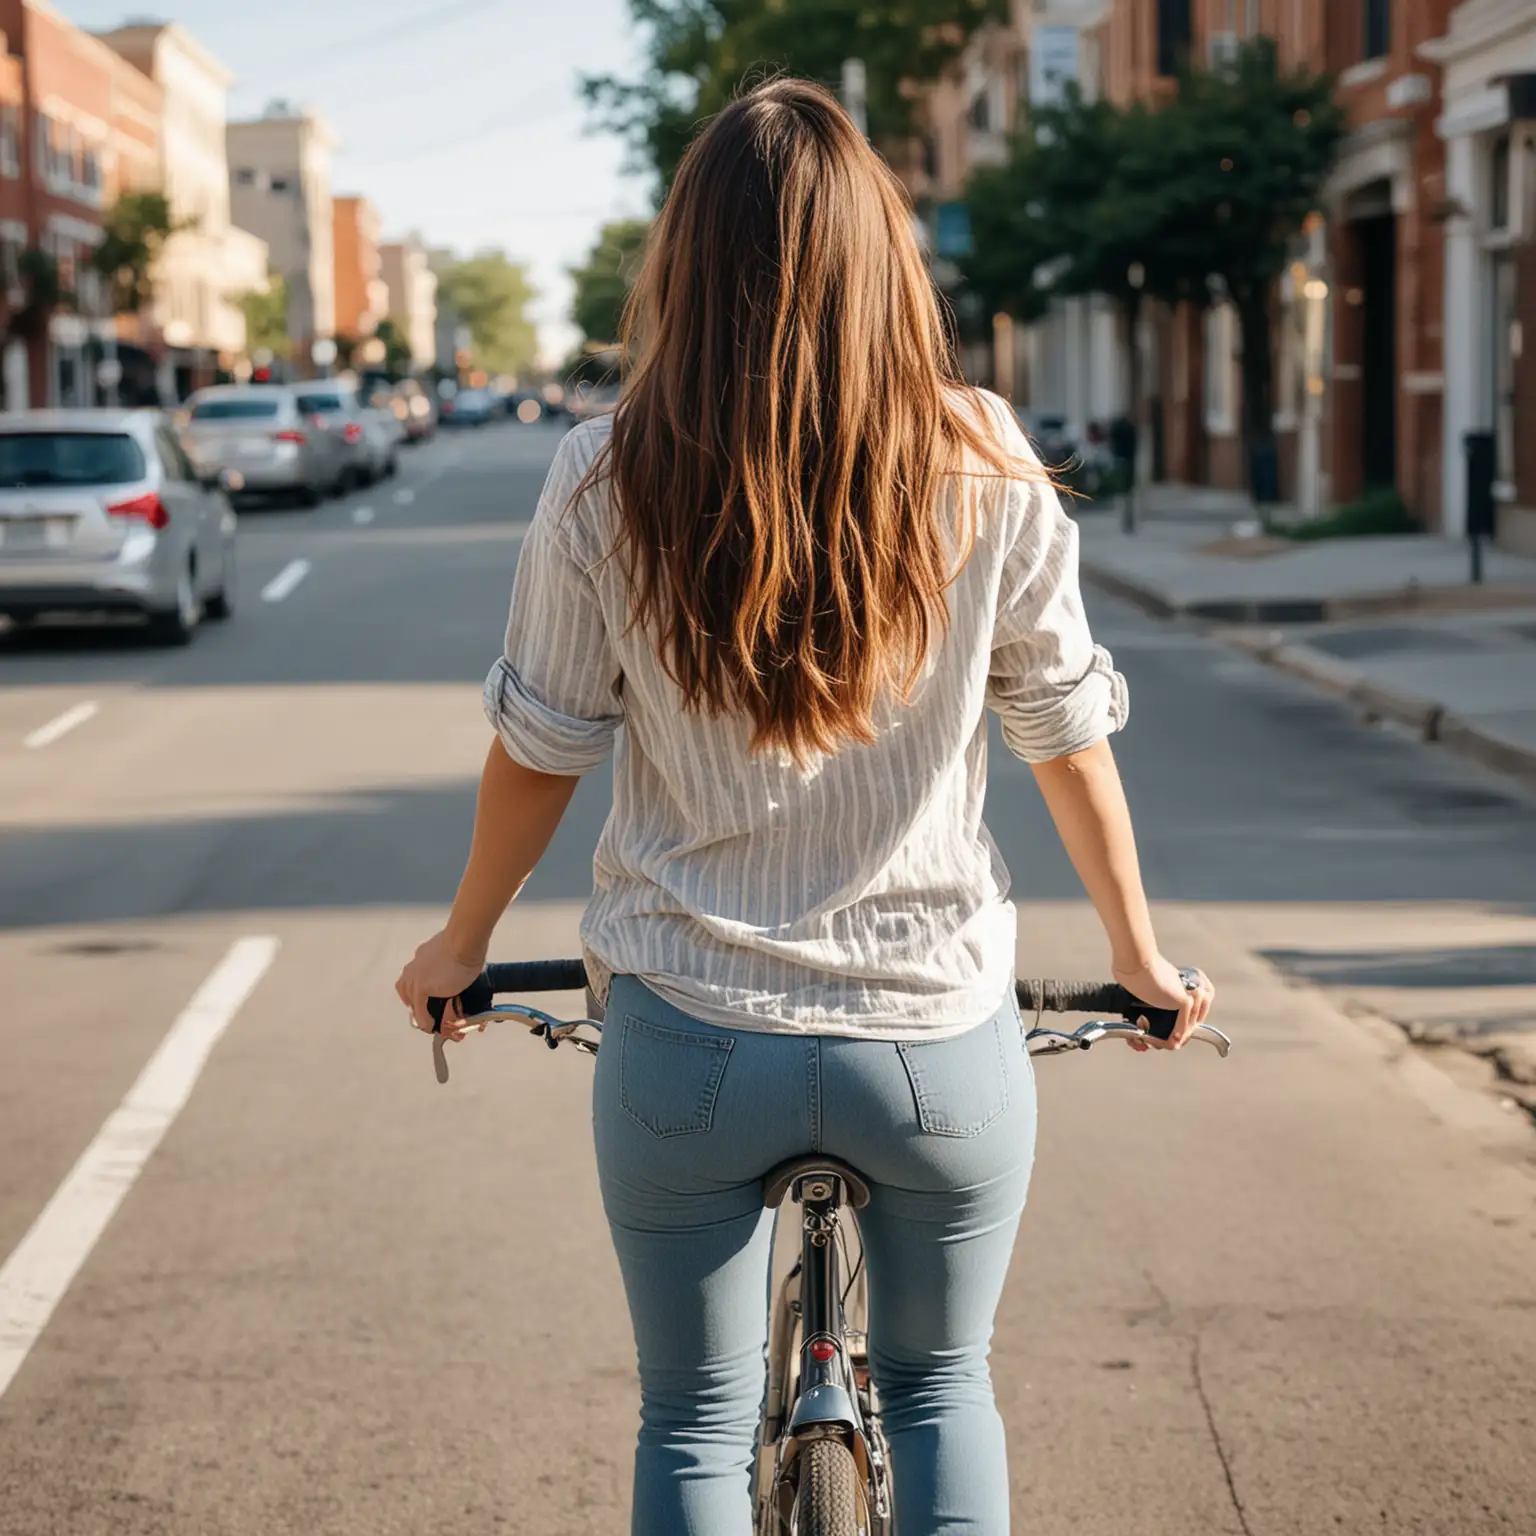 Young American Woman Riding Bicycle on City Street